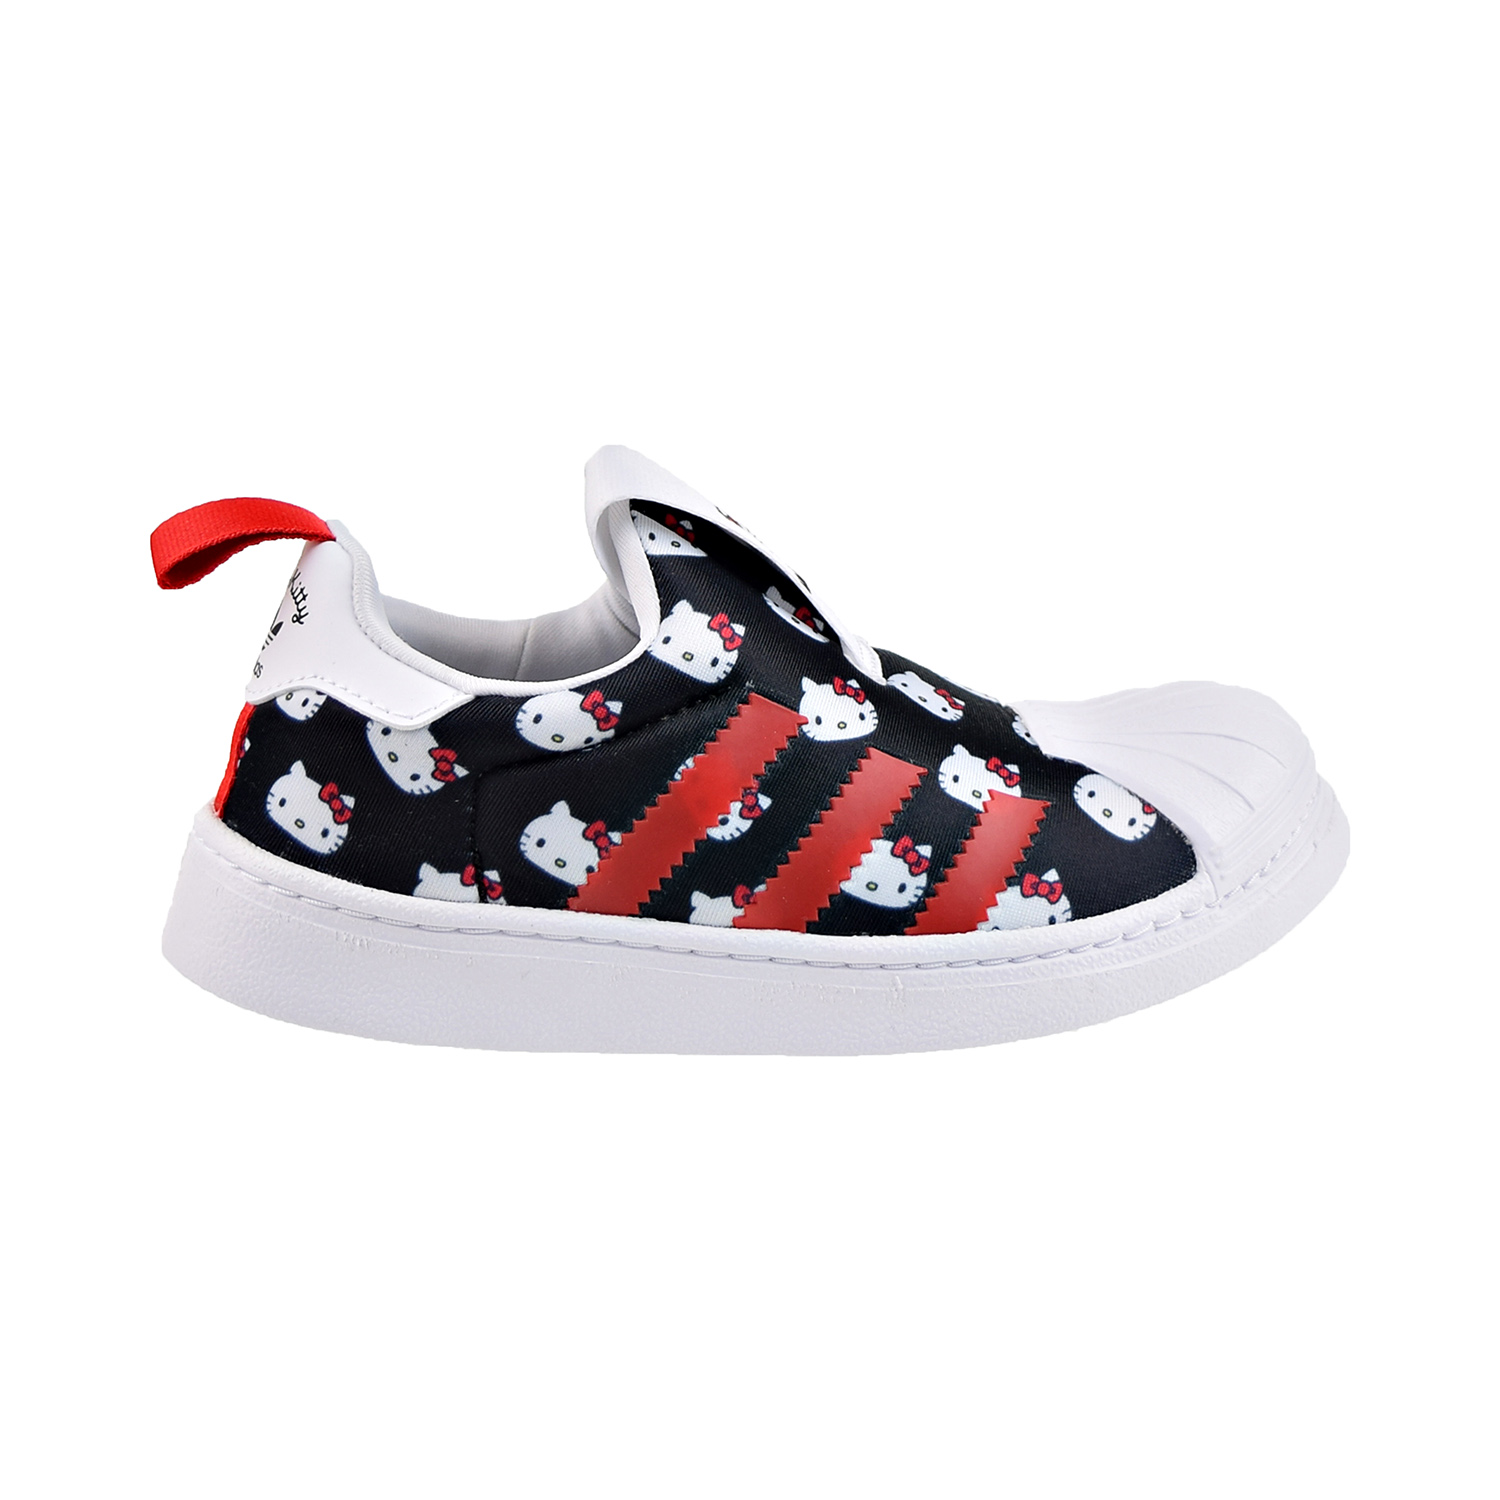 Adidas Hello Kitty Superstar 360 Little Kids' Shoes Cloud White-Core Black-Red gy9212